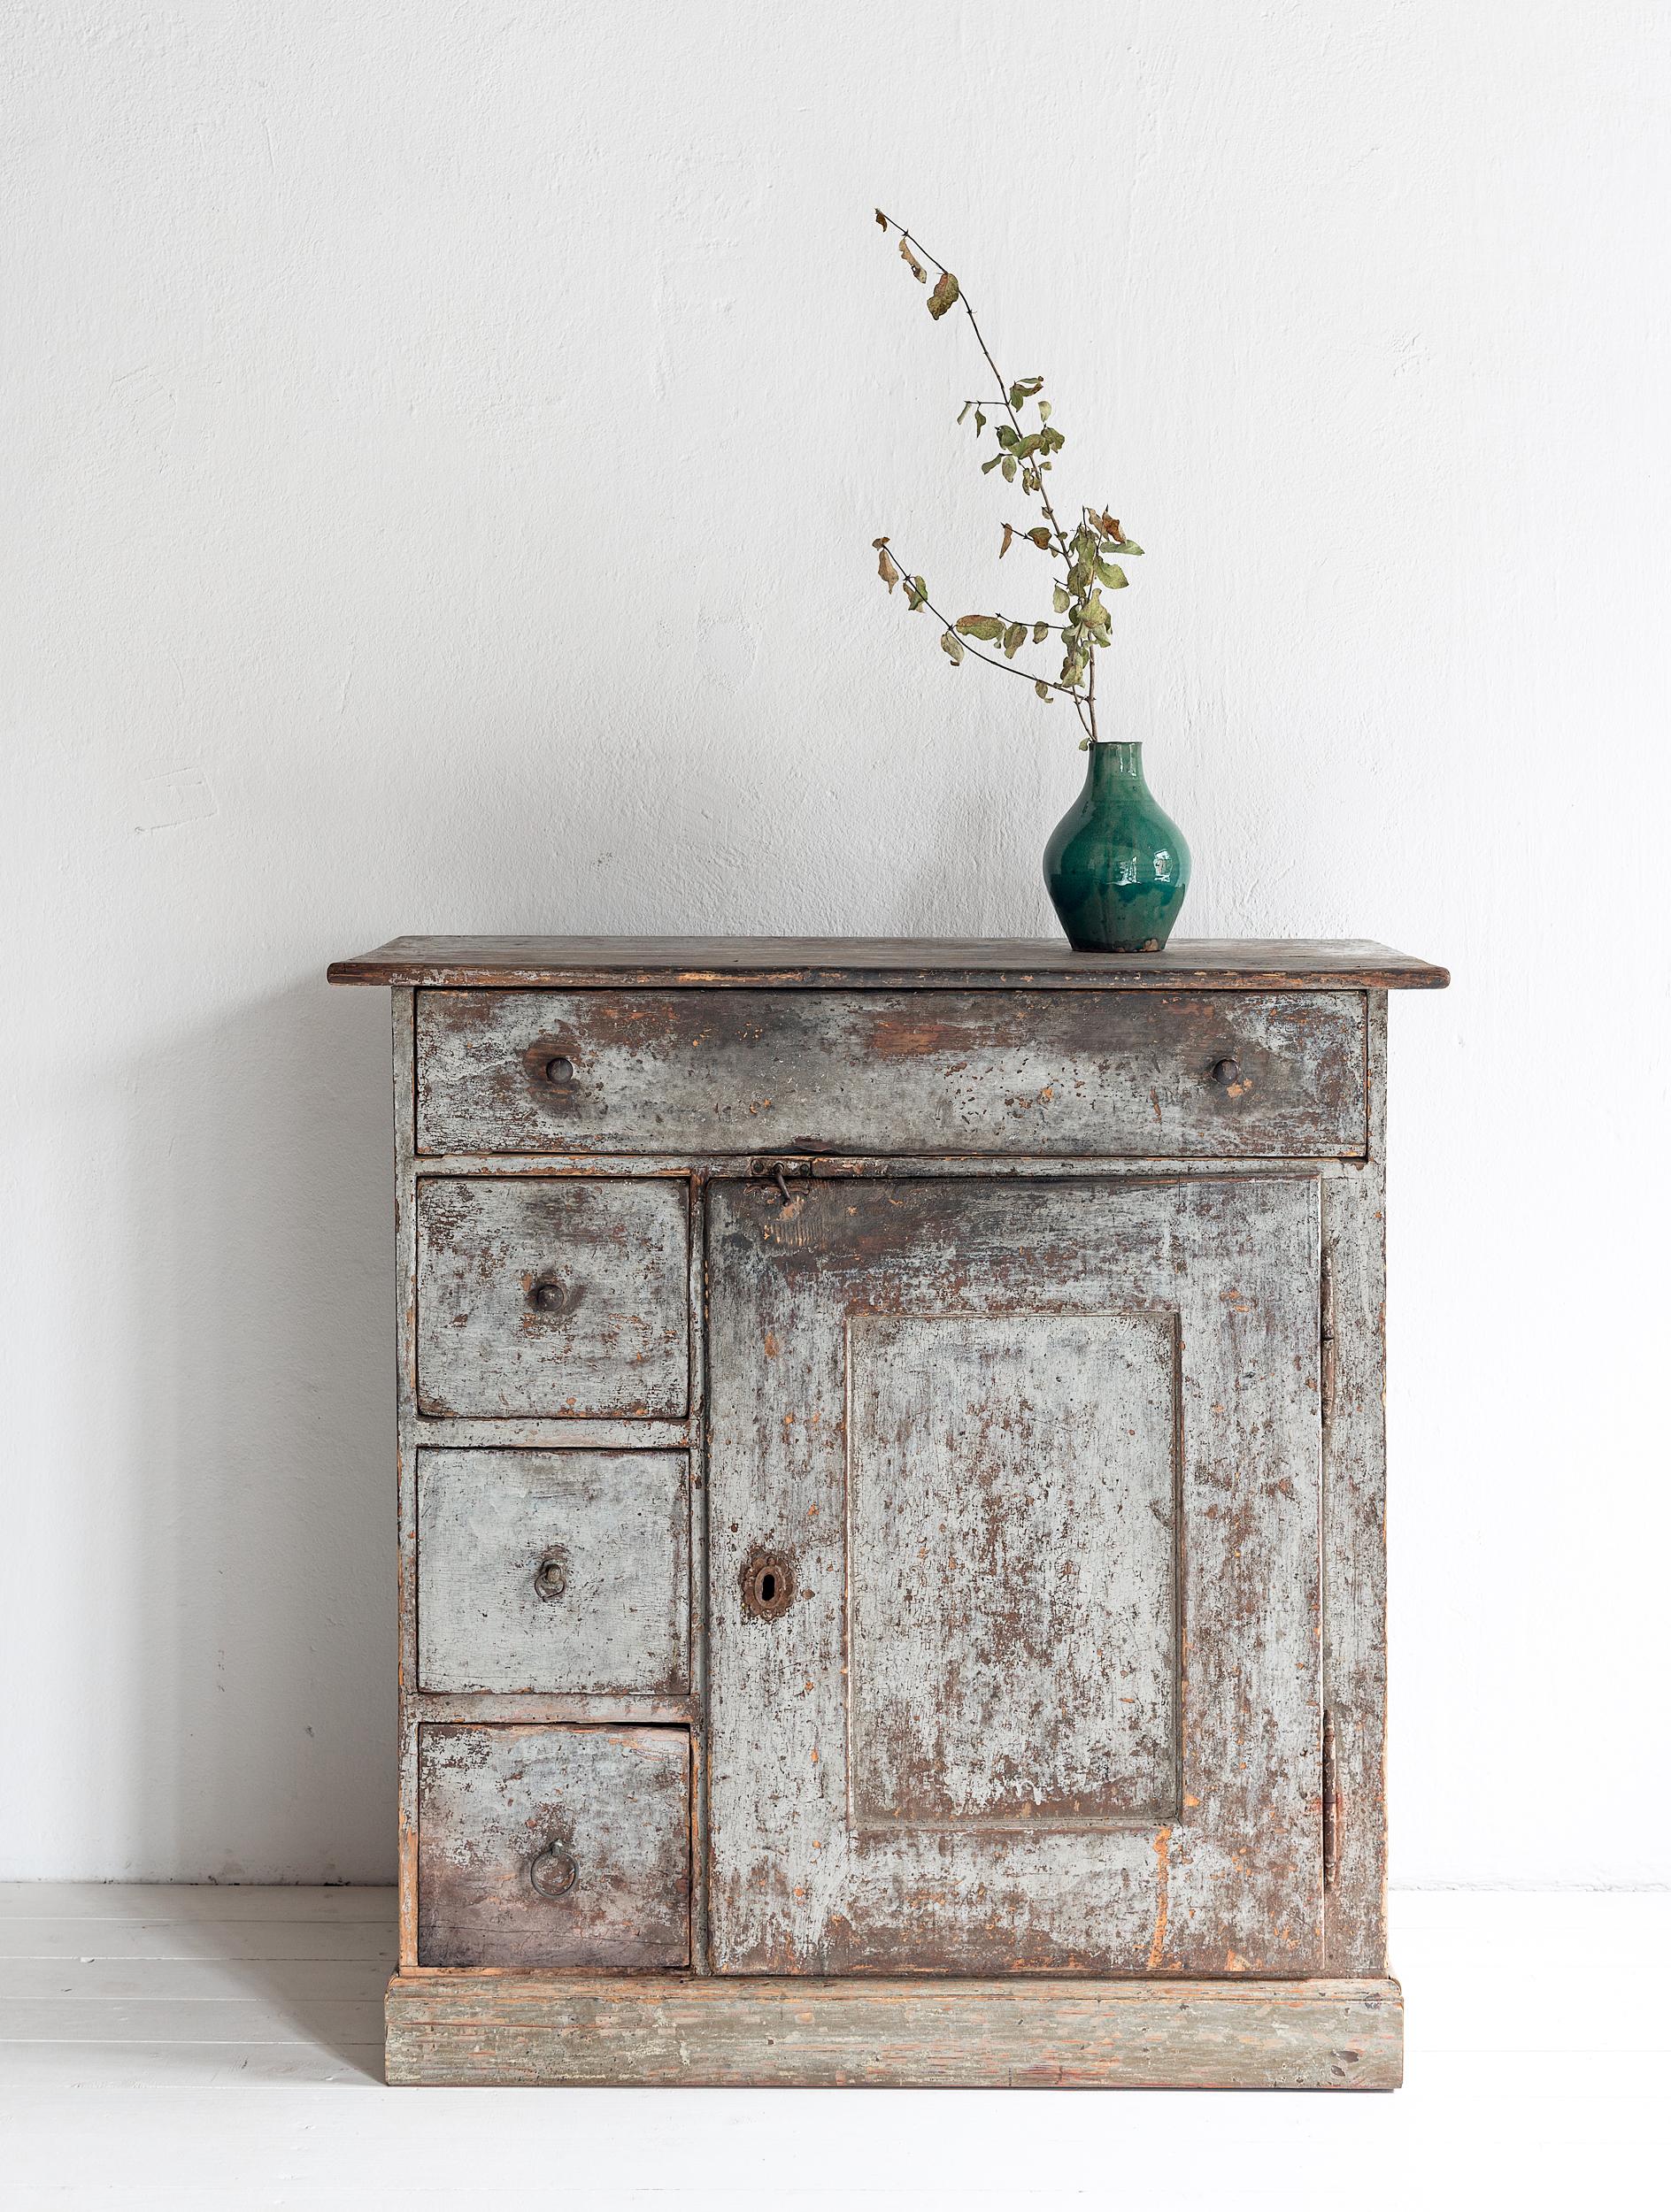 Beautiful simple Swedish 19th century cabinet in untouched original paint. Perfection.